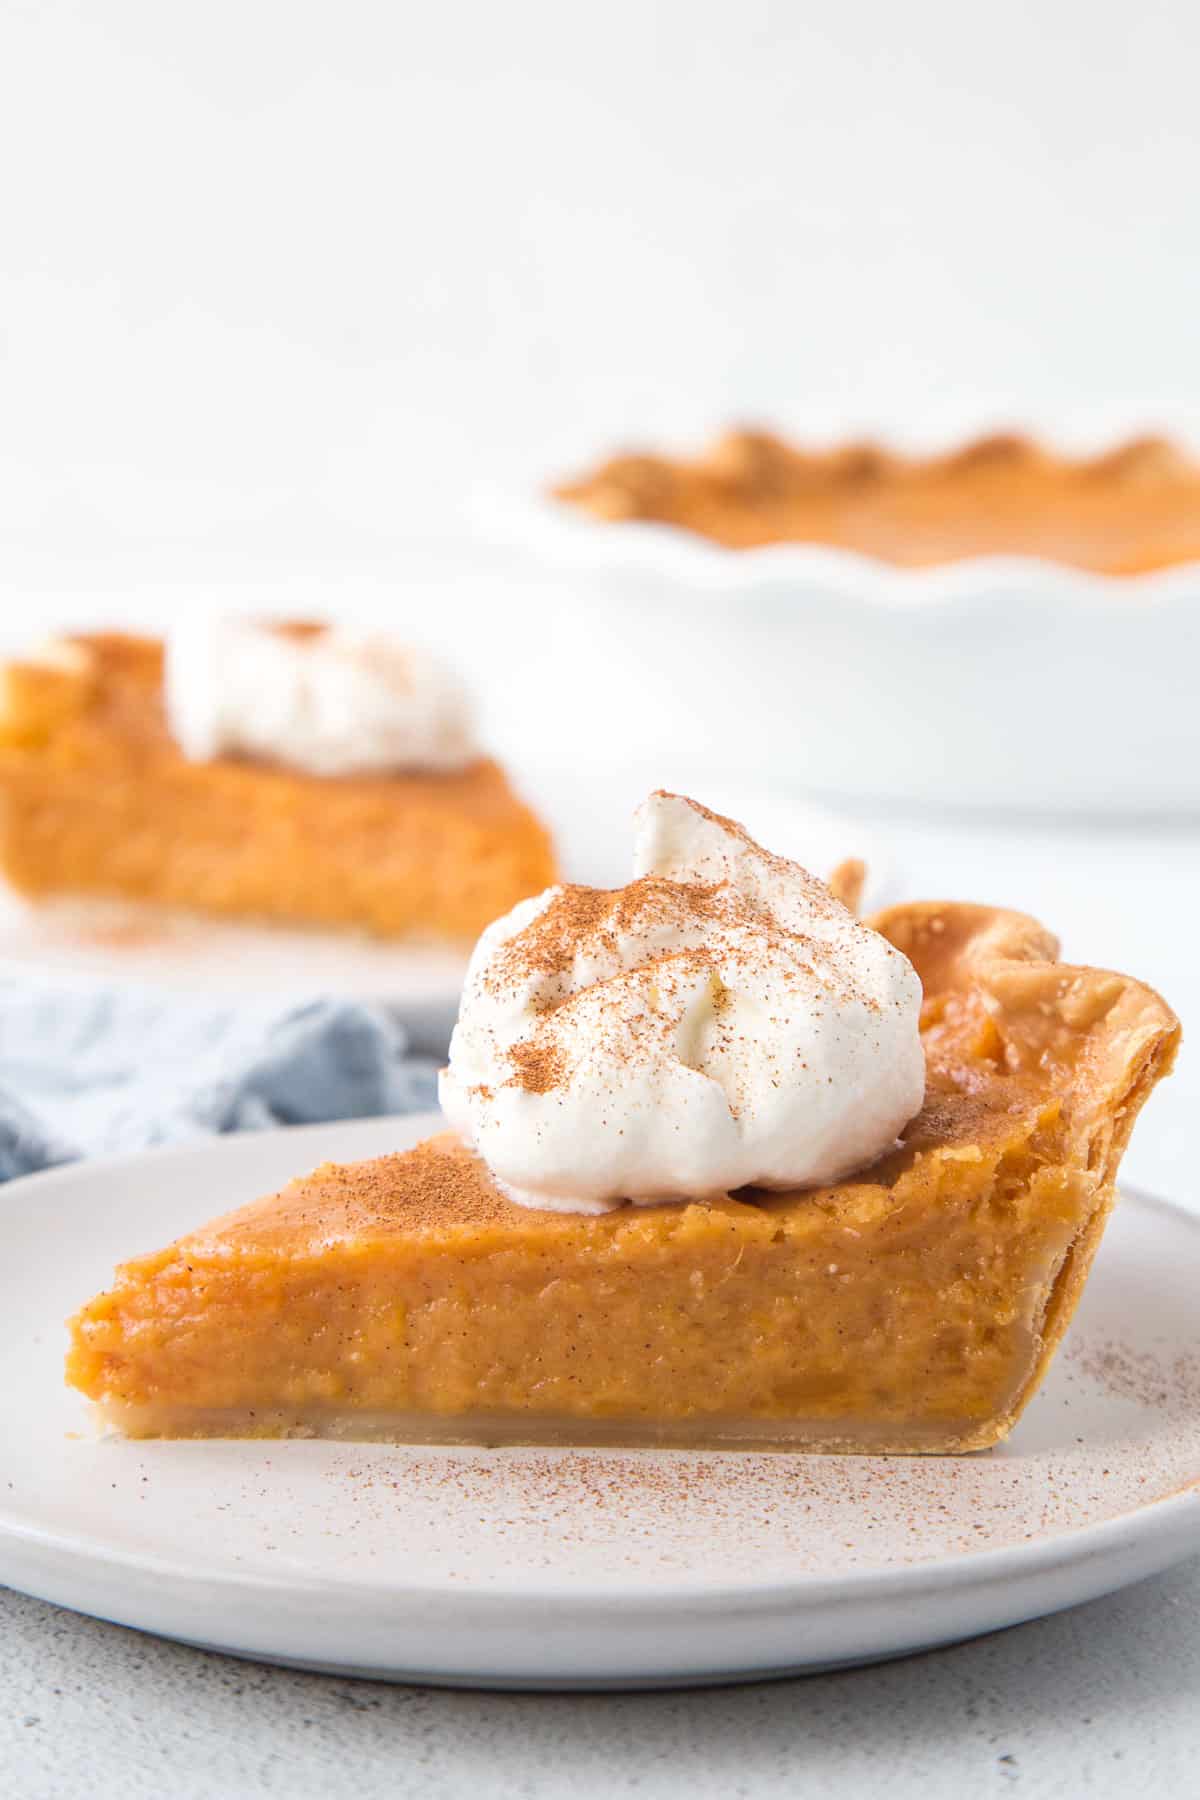 slice of old fashioned sweet potato pie on a white plate, topped with whipped cream and a sprinkle of cinnamon.